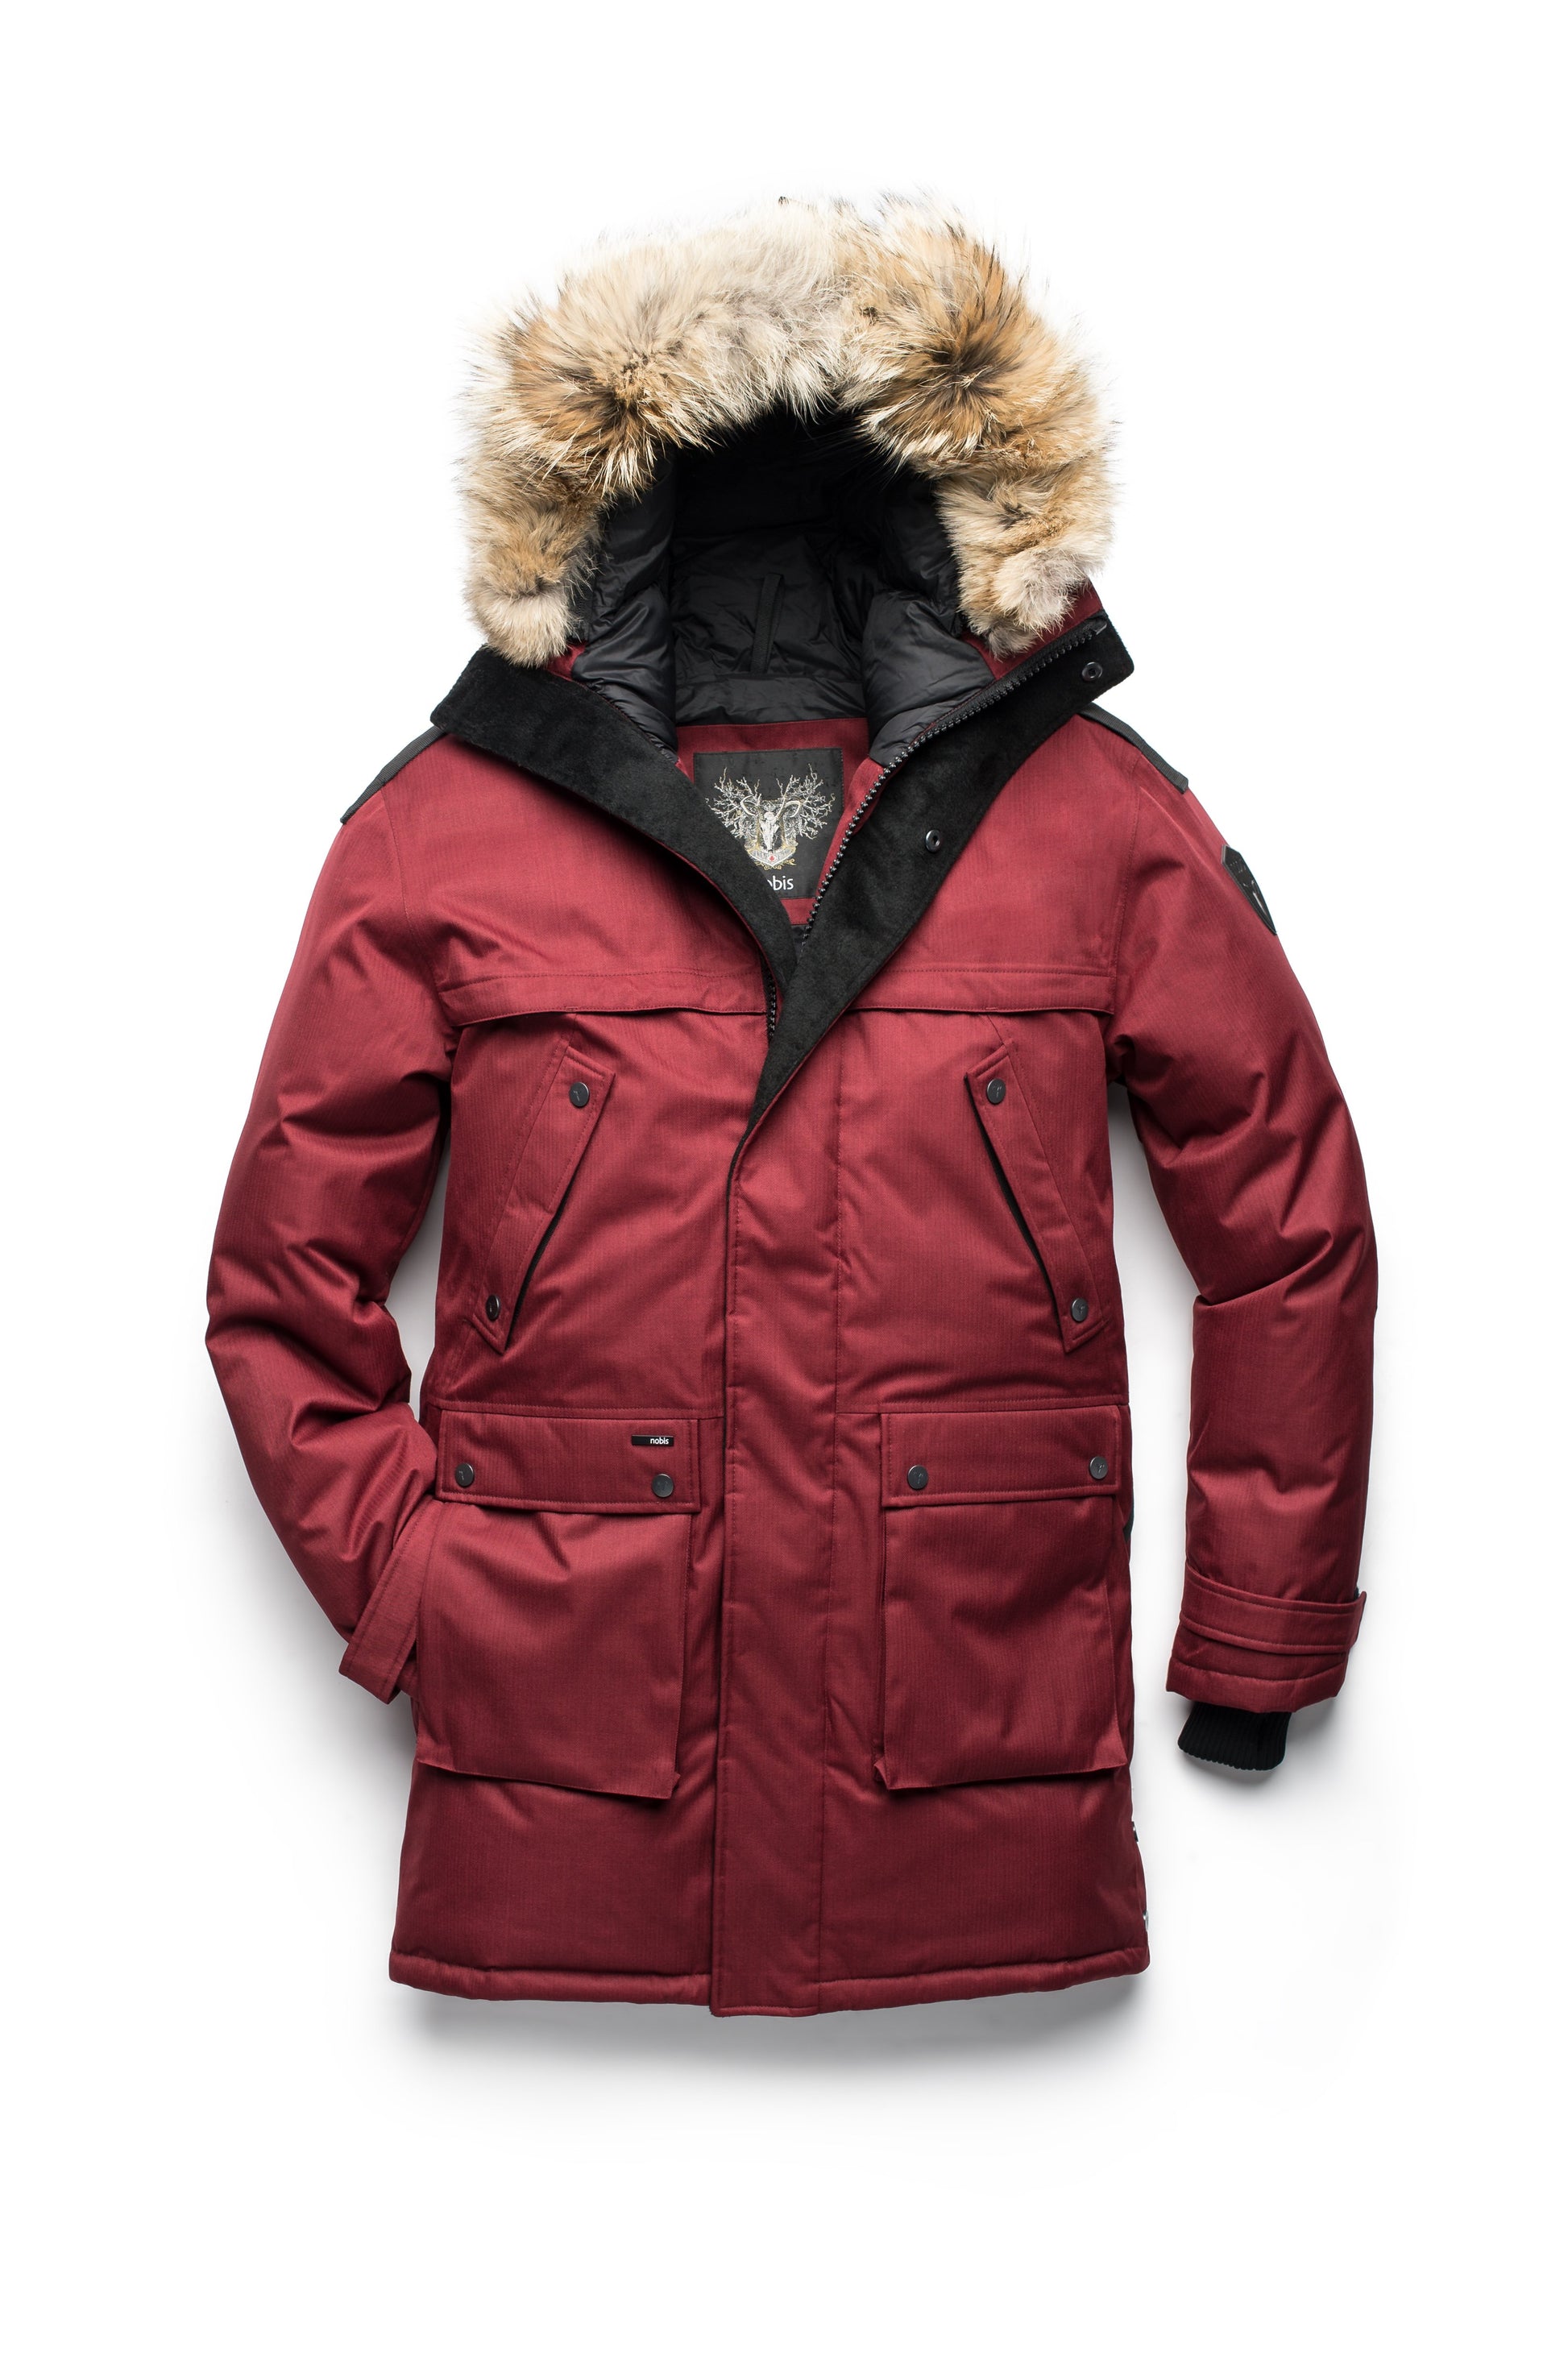 Men's Best Selling Parka the Yatesy is a down filled jacket with a zipper closure and magnetic placket in CH Cabernet